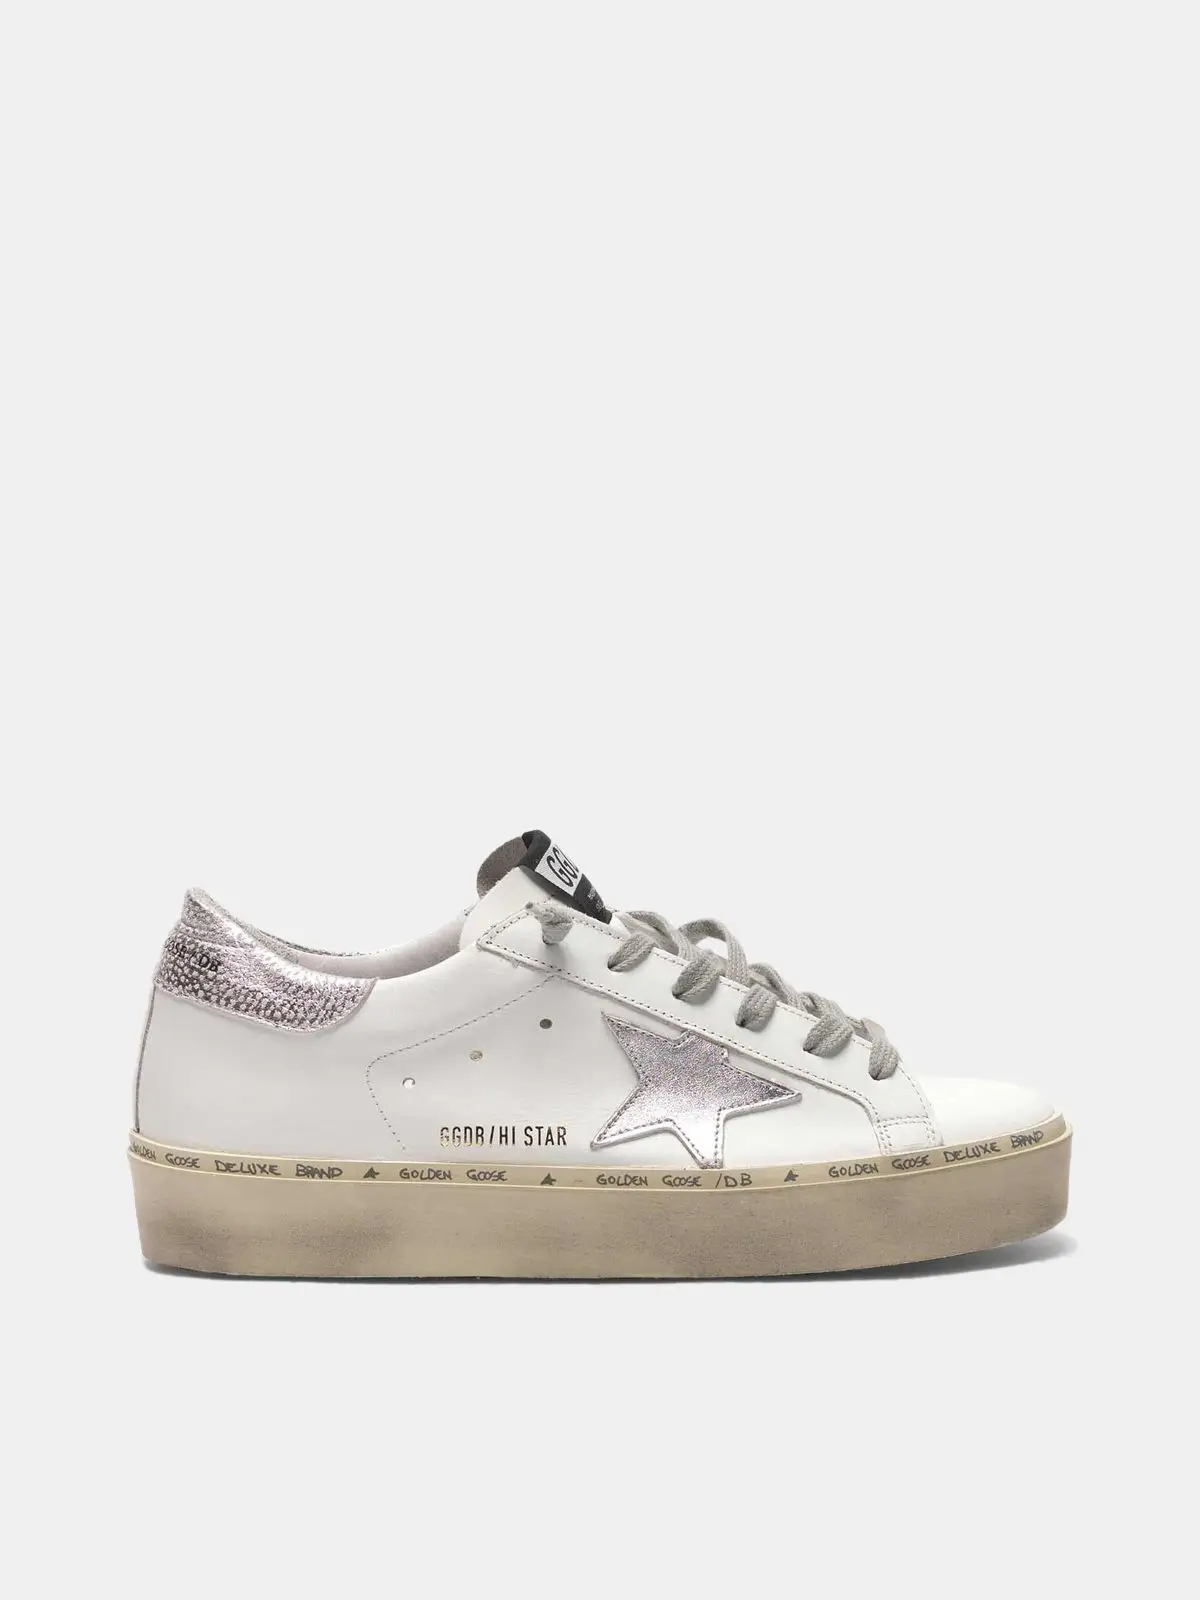 Hi Star sneakers with fuchsia star and leopard-print heel tab - GOLDEN GOOSE